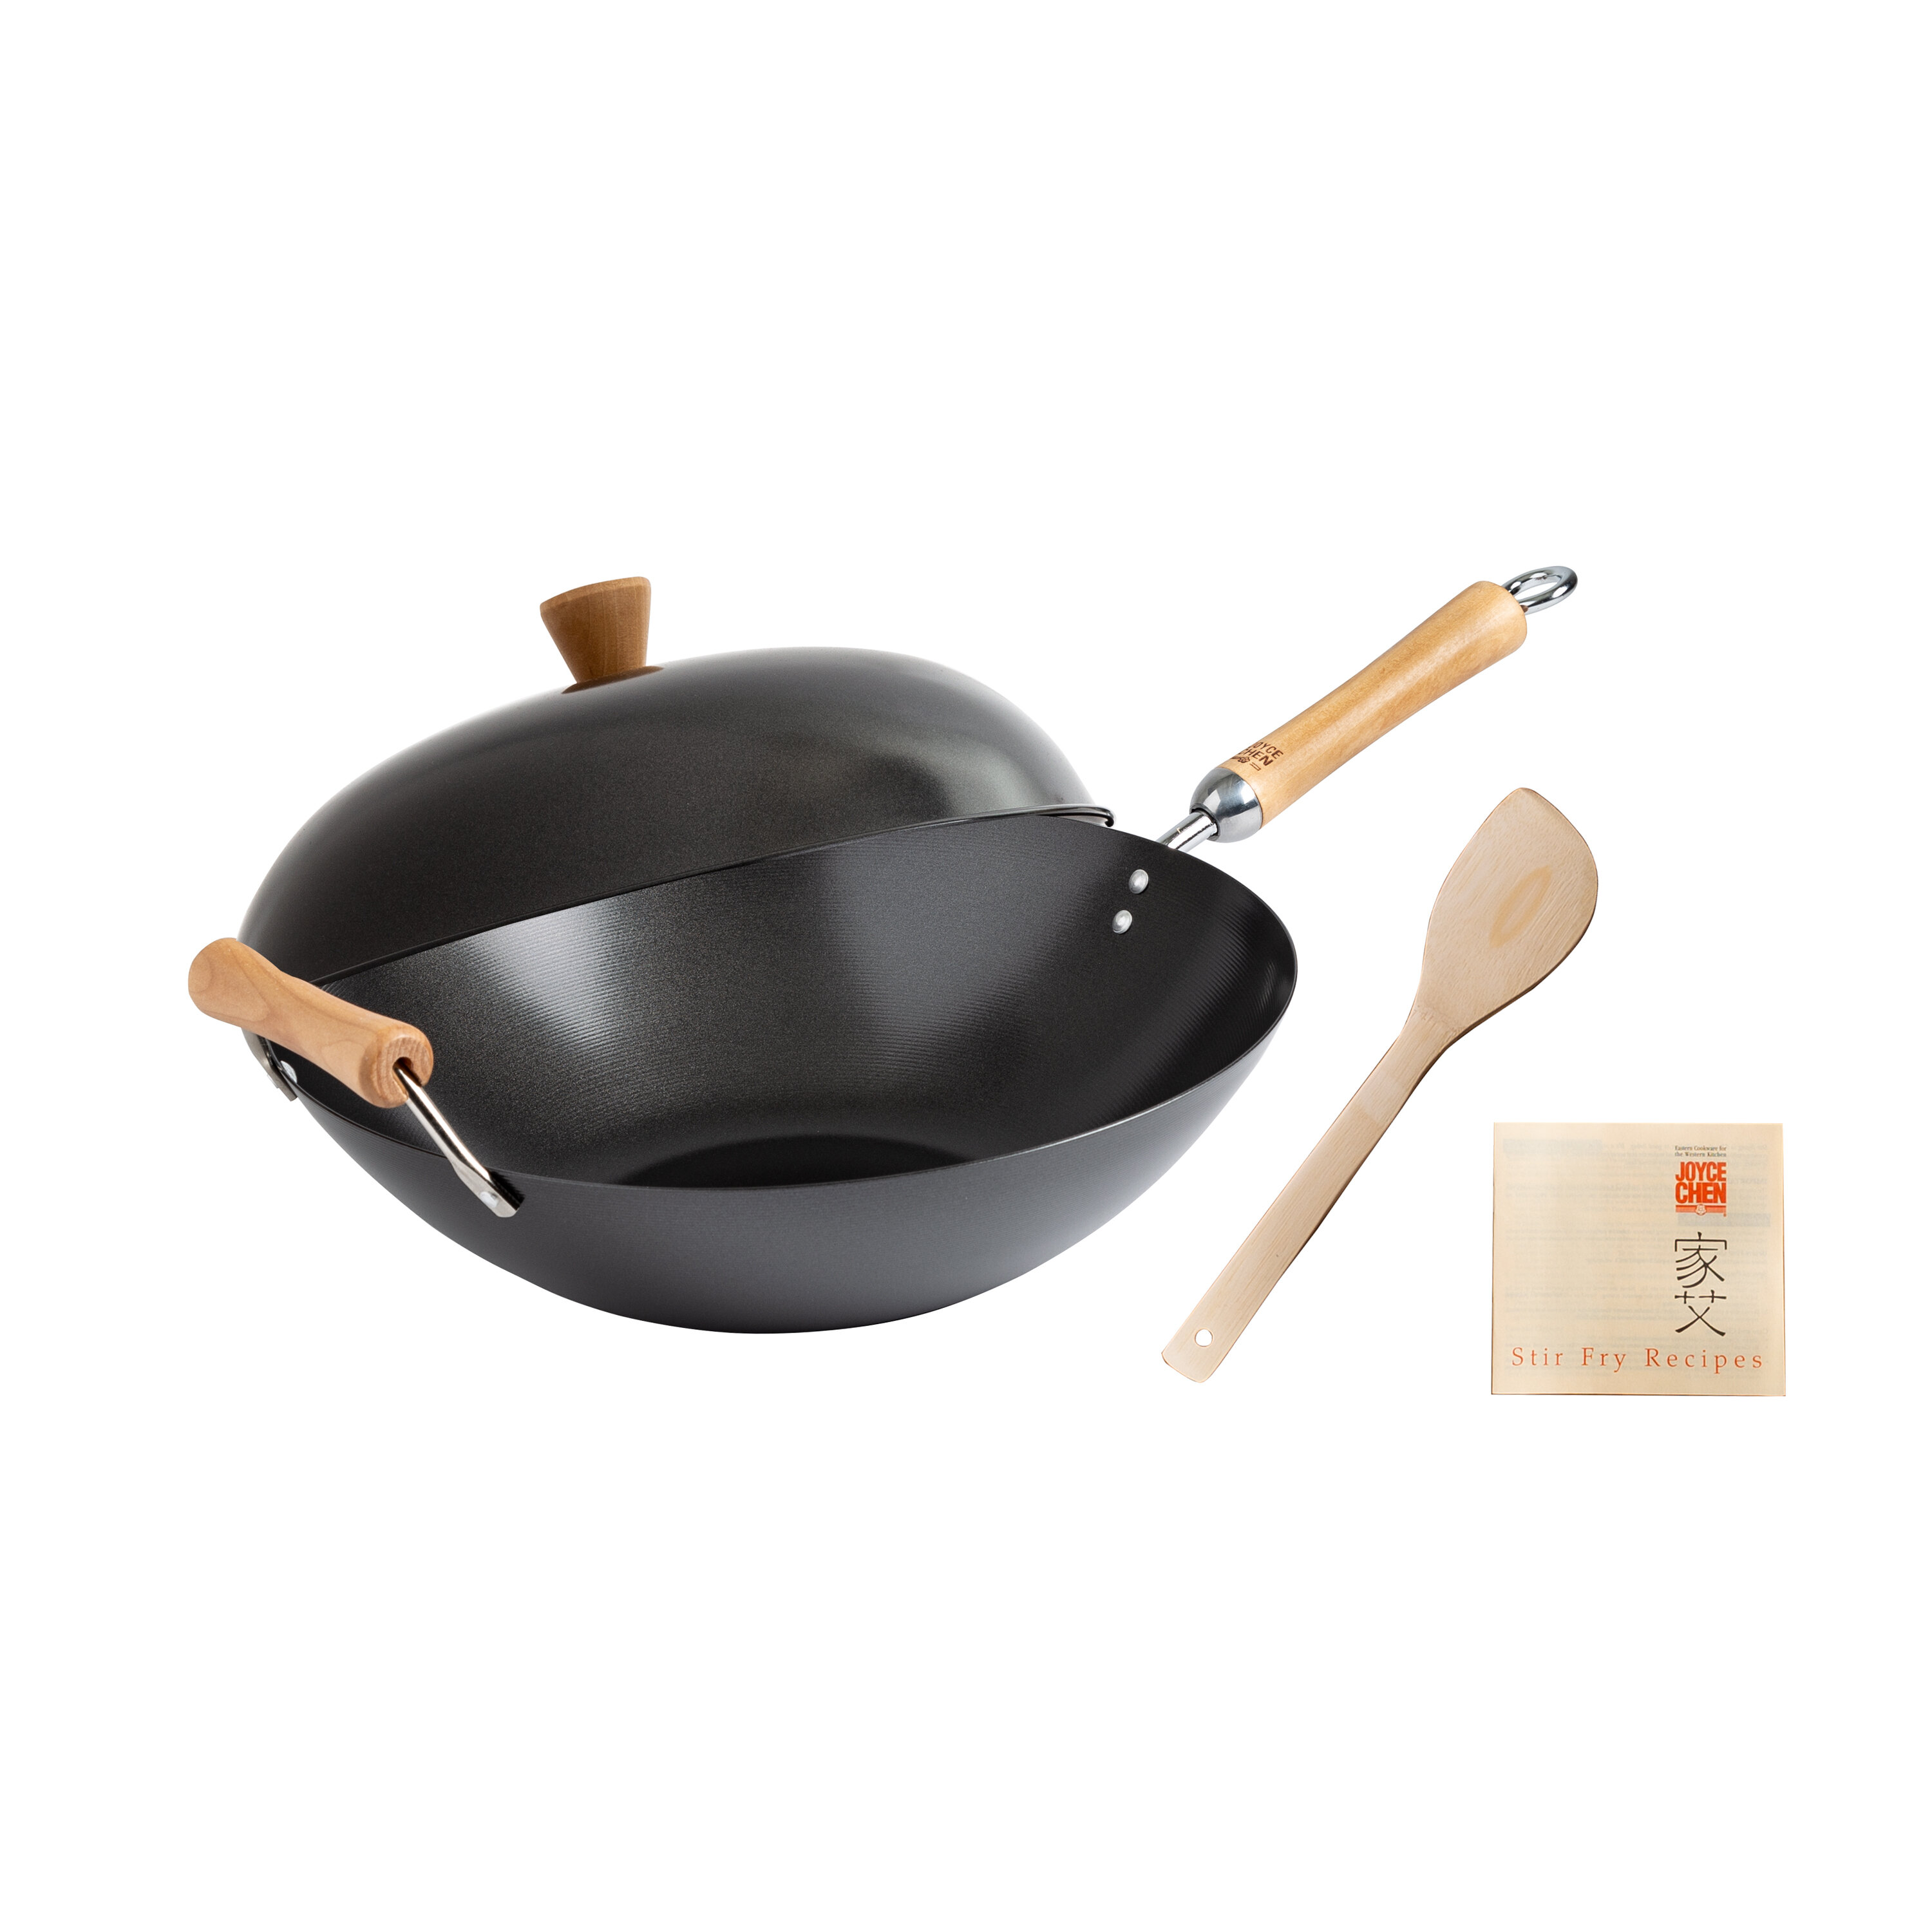 DALELEE Non-Stick Double Sided Honeycomb Cooking Wok with Lid